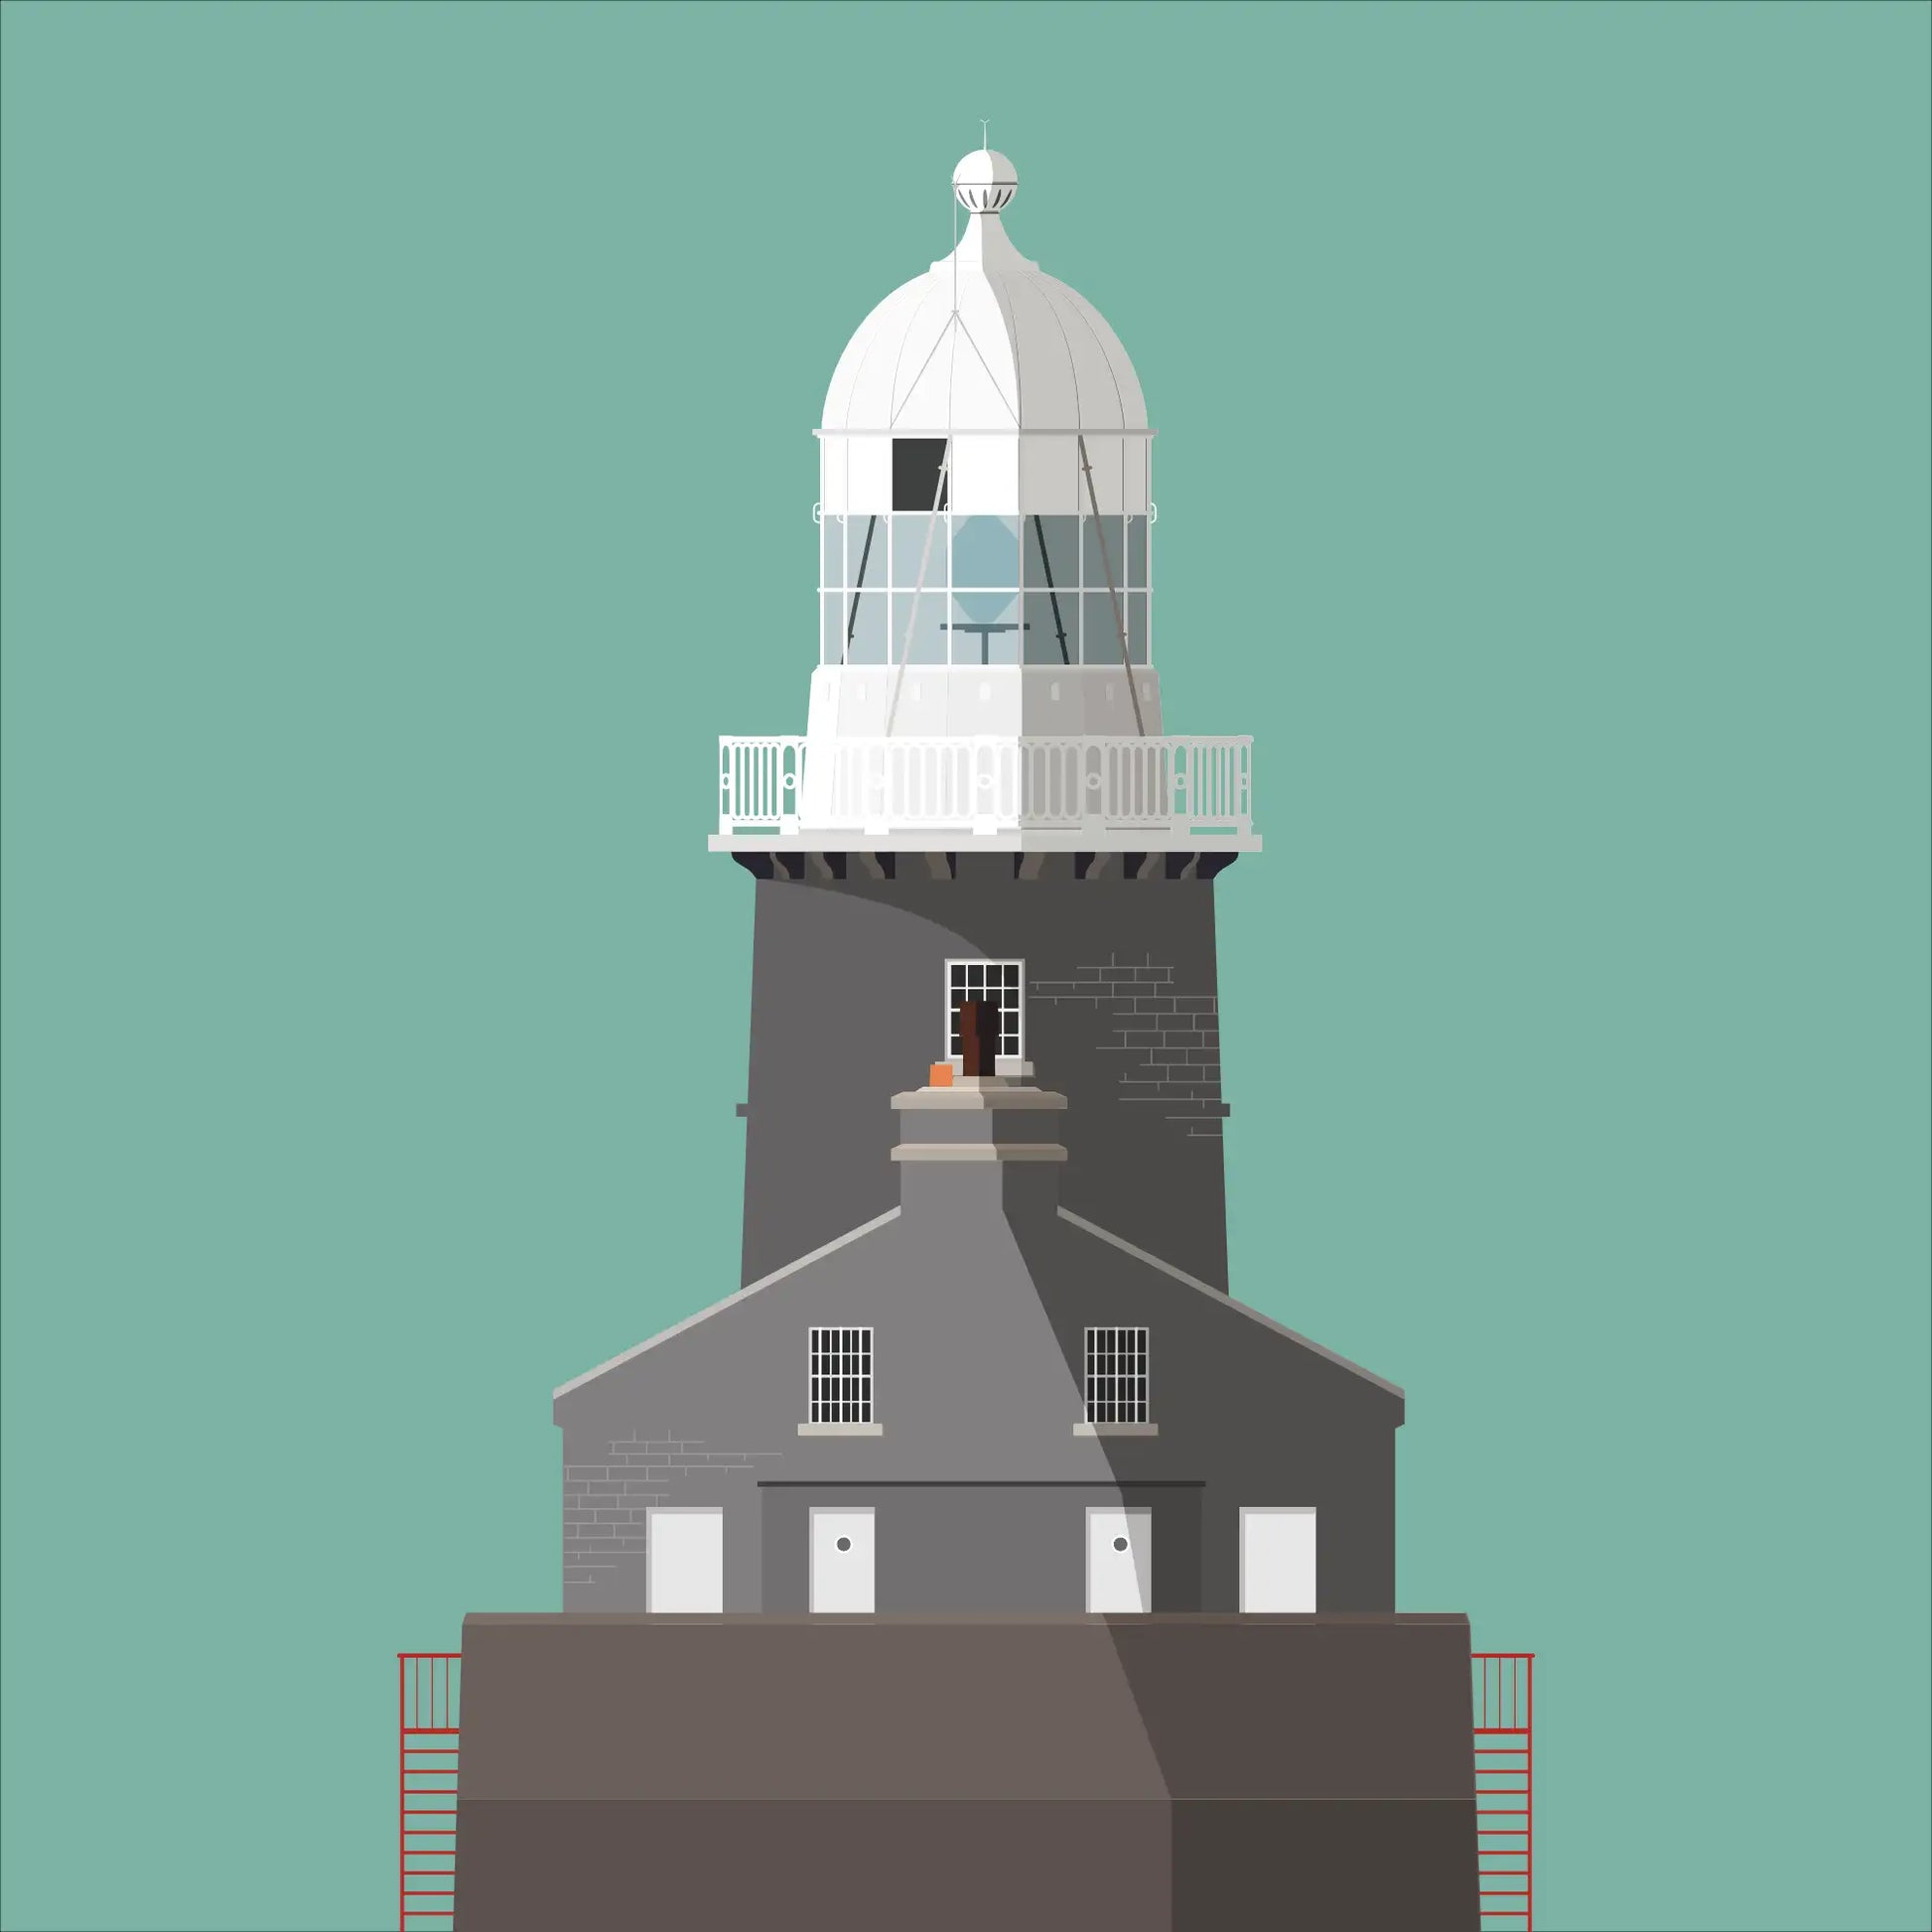 Illustration of Beeves Rock lighthouse on a white background inside light blue square.